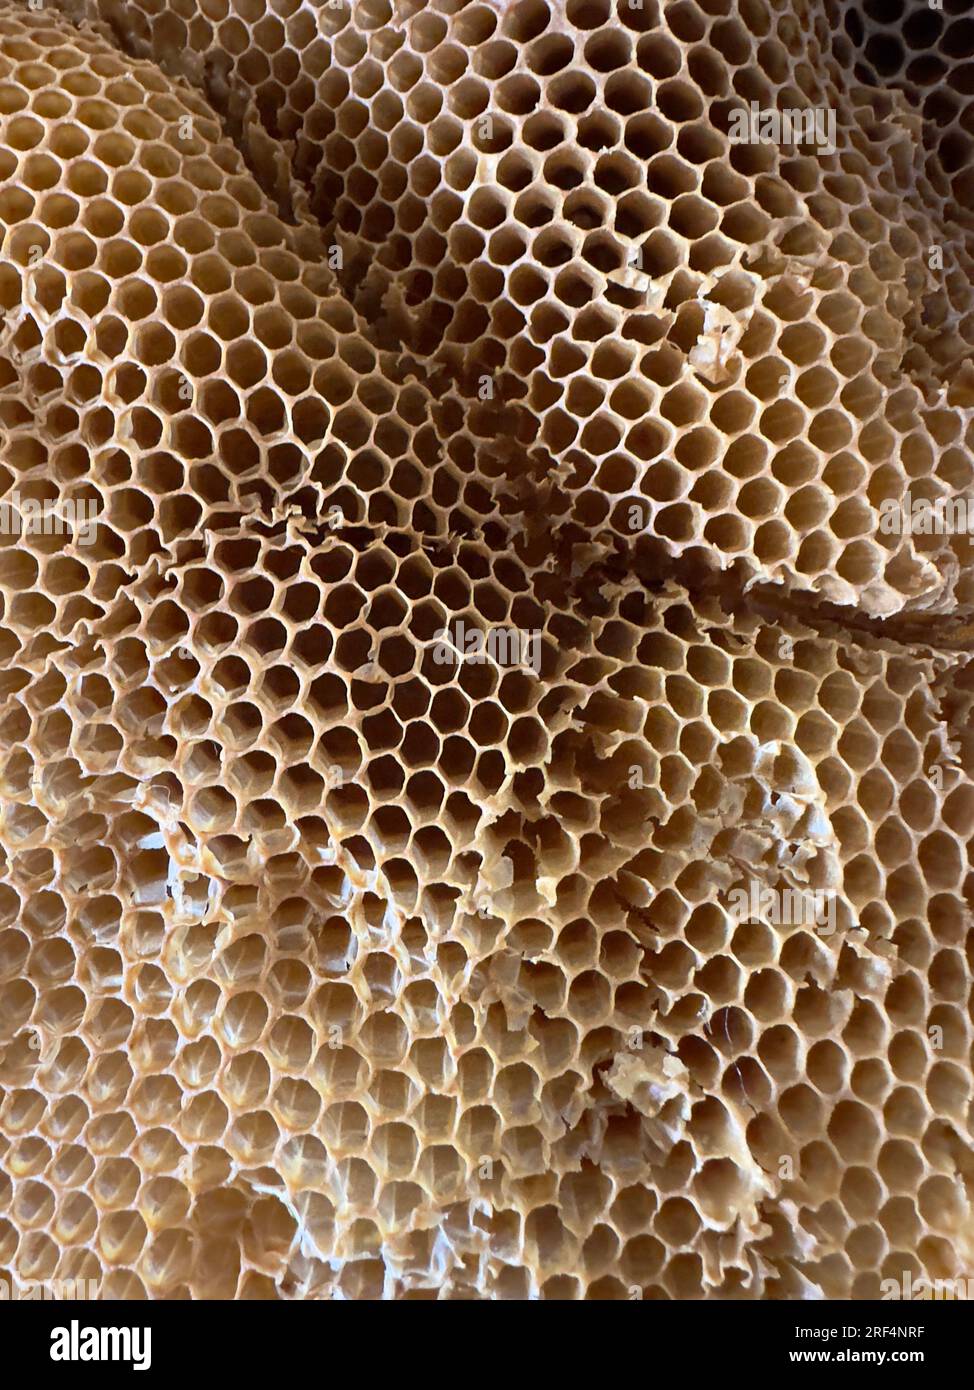 Natural honeycomb from beeswax Stock Photo